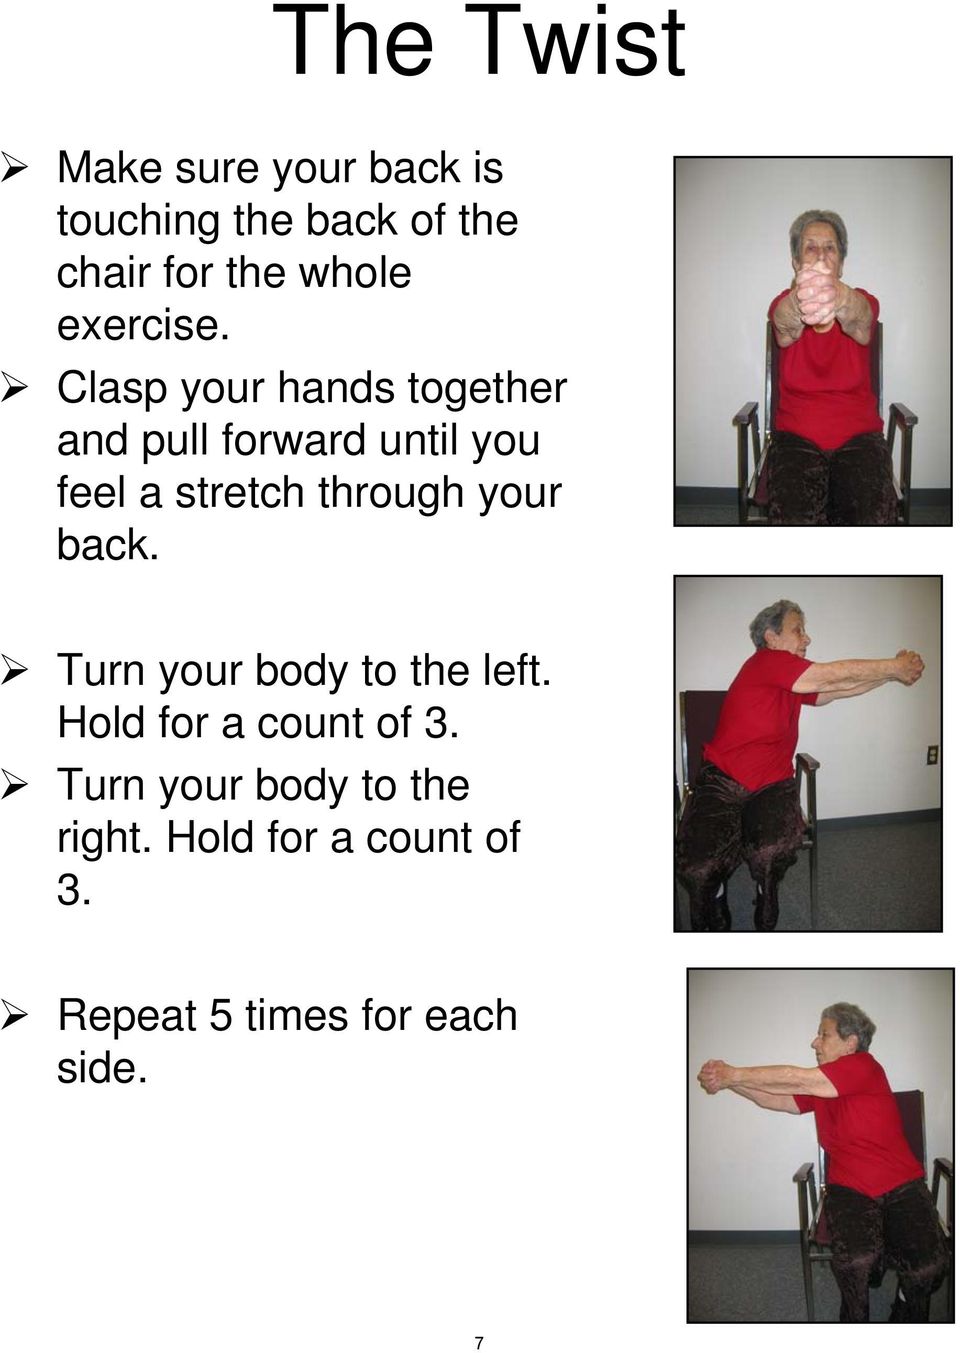 Clasp your hands together and pull forward until you feel a stretch through